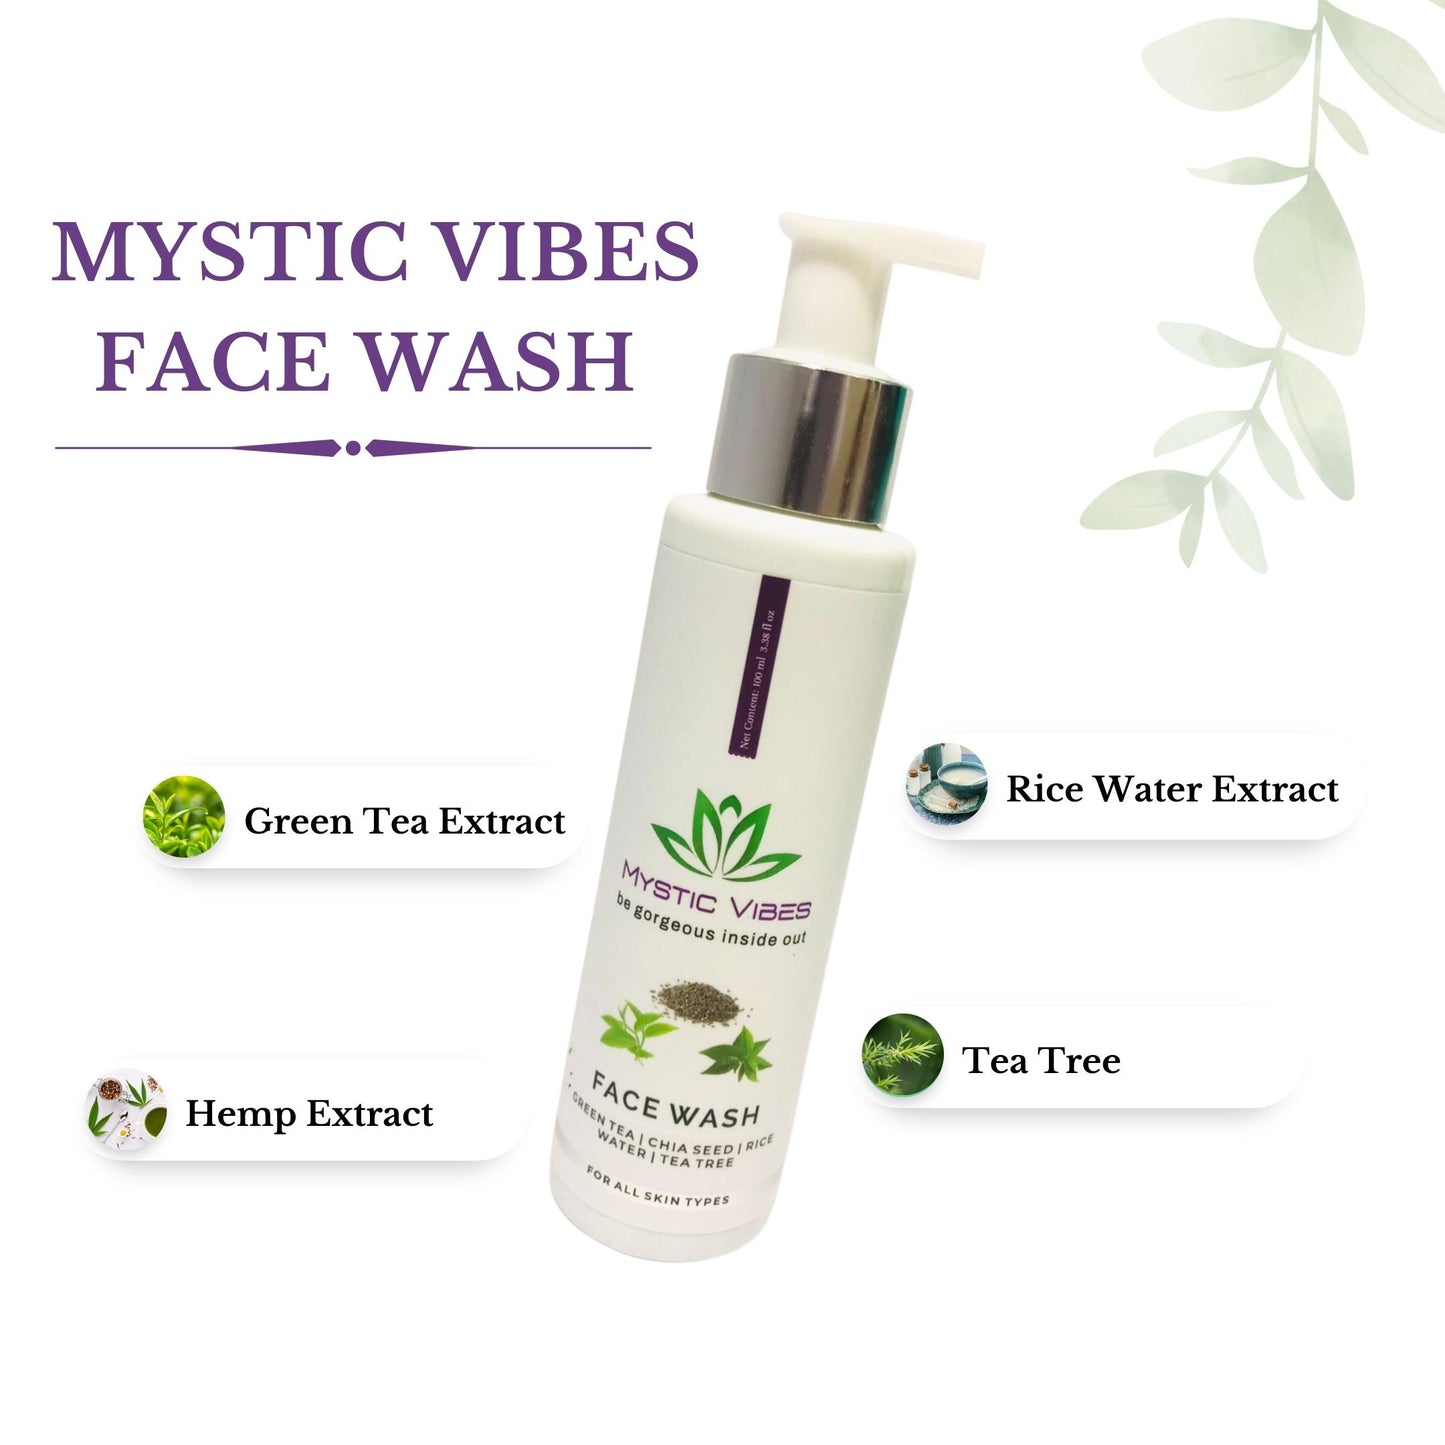 Mystic Vibes Face Wash